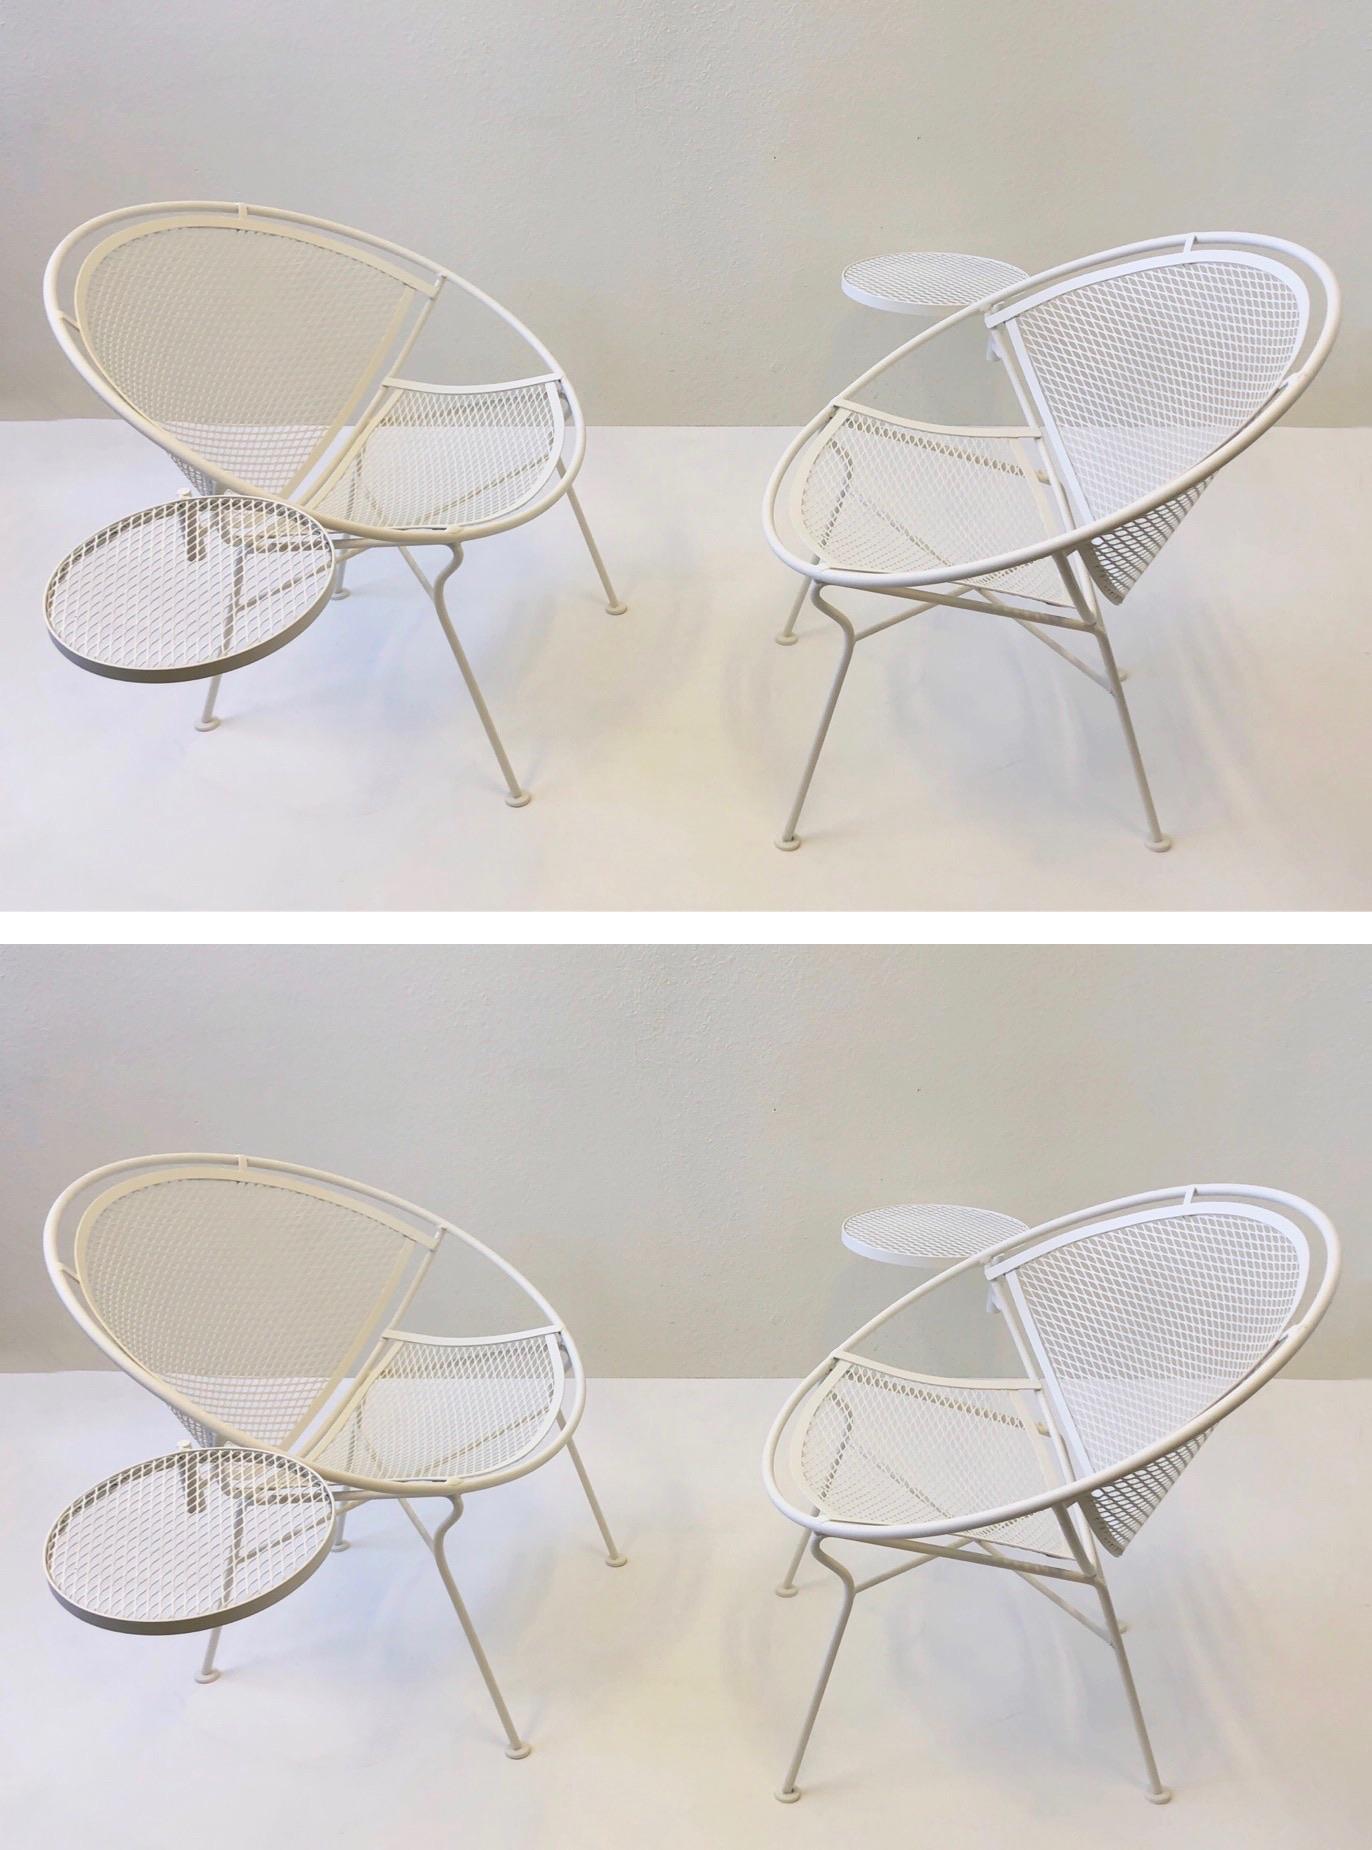 A set of four ‘Radar’ patio chairs with a occasional side table designed by Salterini in the 1950s. The chairs are constructed of steel that has been newly powder coated satin white. The occasional table can be removed if desired. We also have an